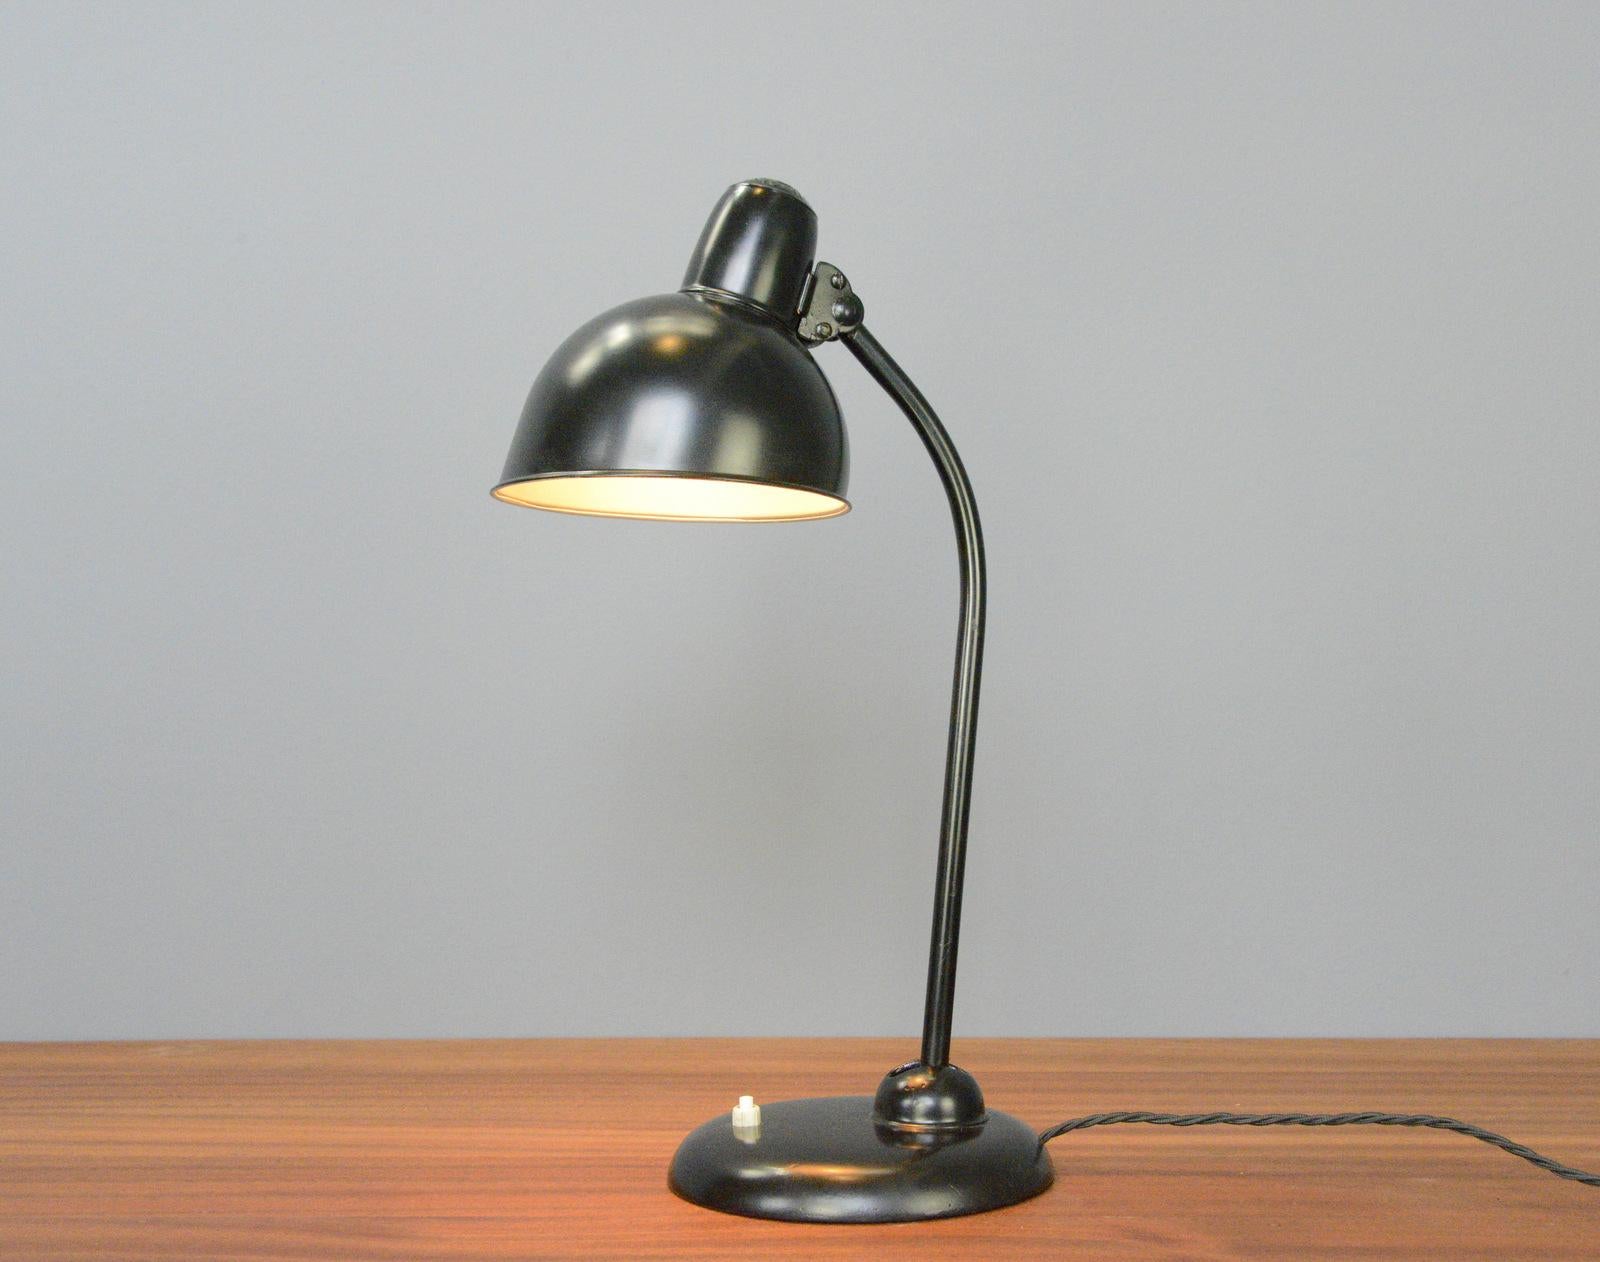 Model 6556 Table Lamp by Kaiser Idell Circa 1930s

- Steel shade with relief Kaiser Idell branding
- On/Off switch on the base
- Takes E27 fitting bulbs
- Adjustable arm and shade
- Designed by Christian Dell
- Model 6556 Kaiser Idell
-